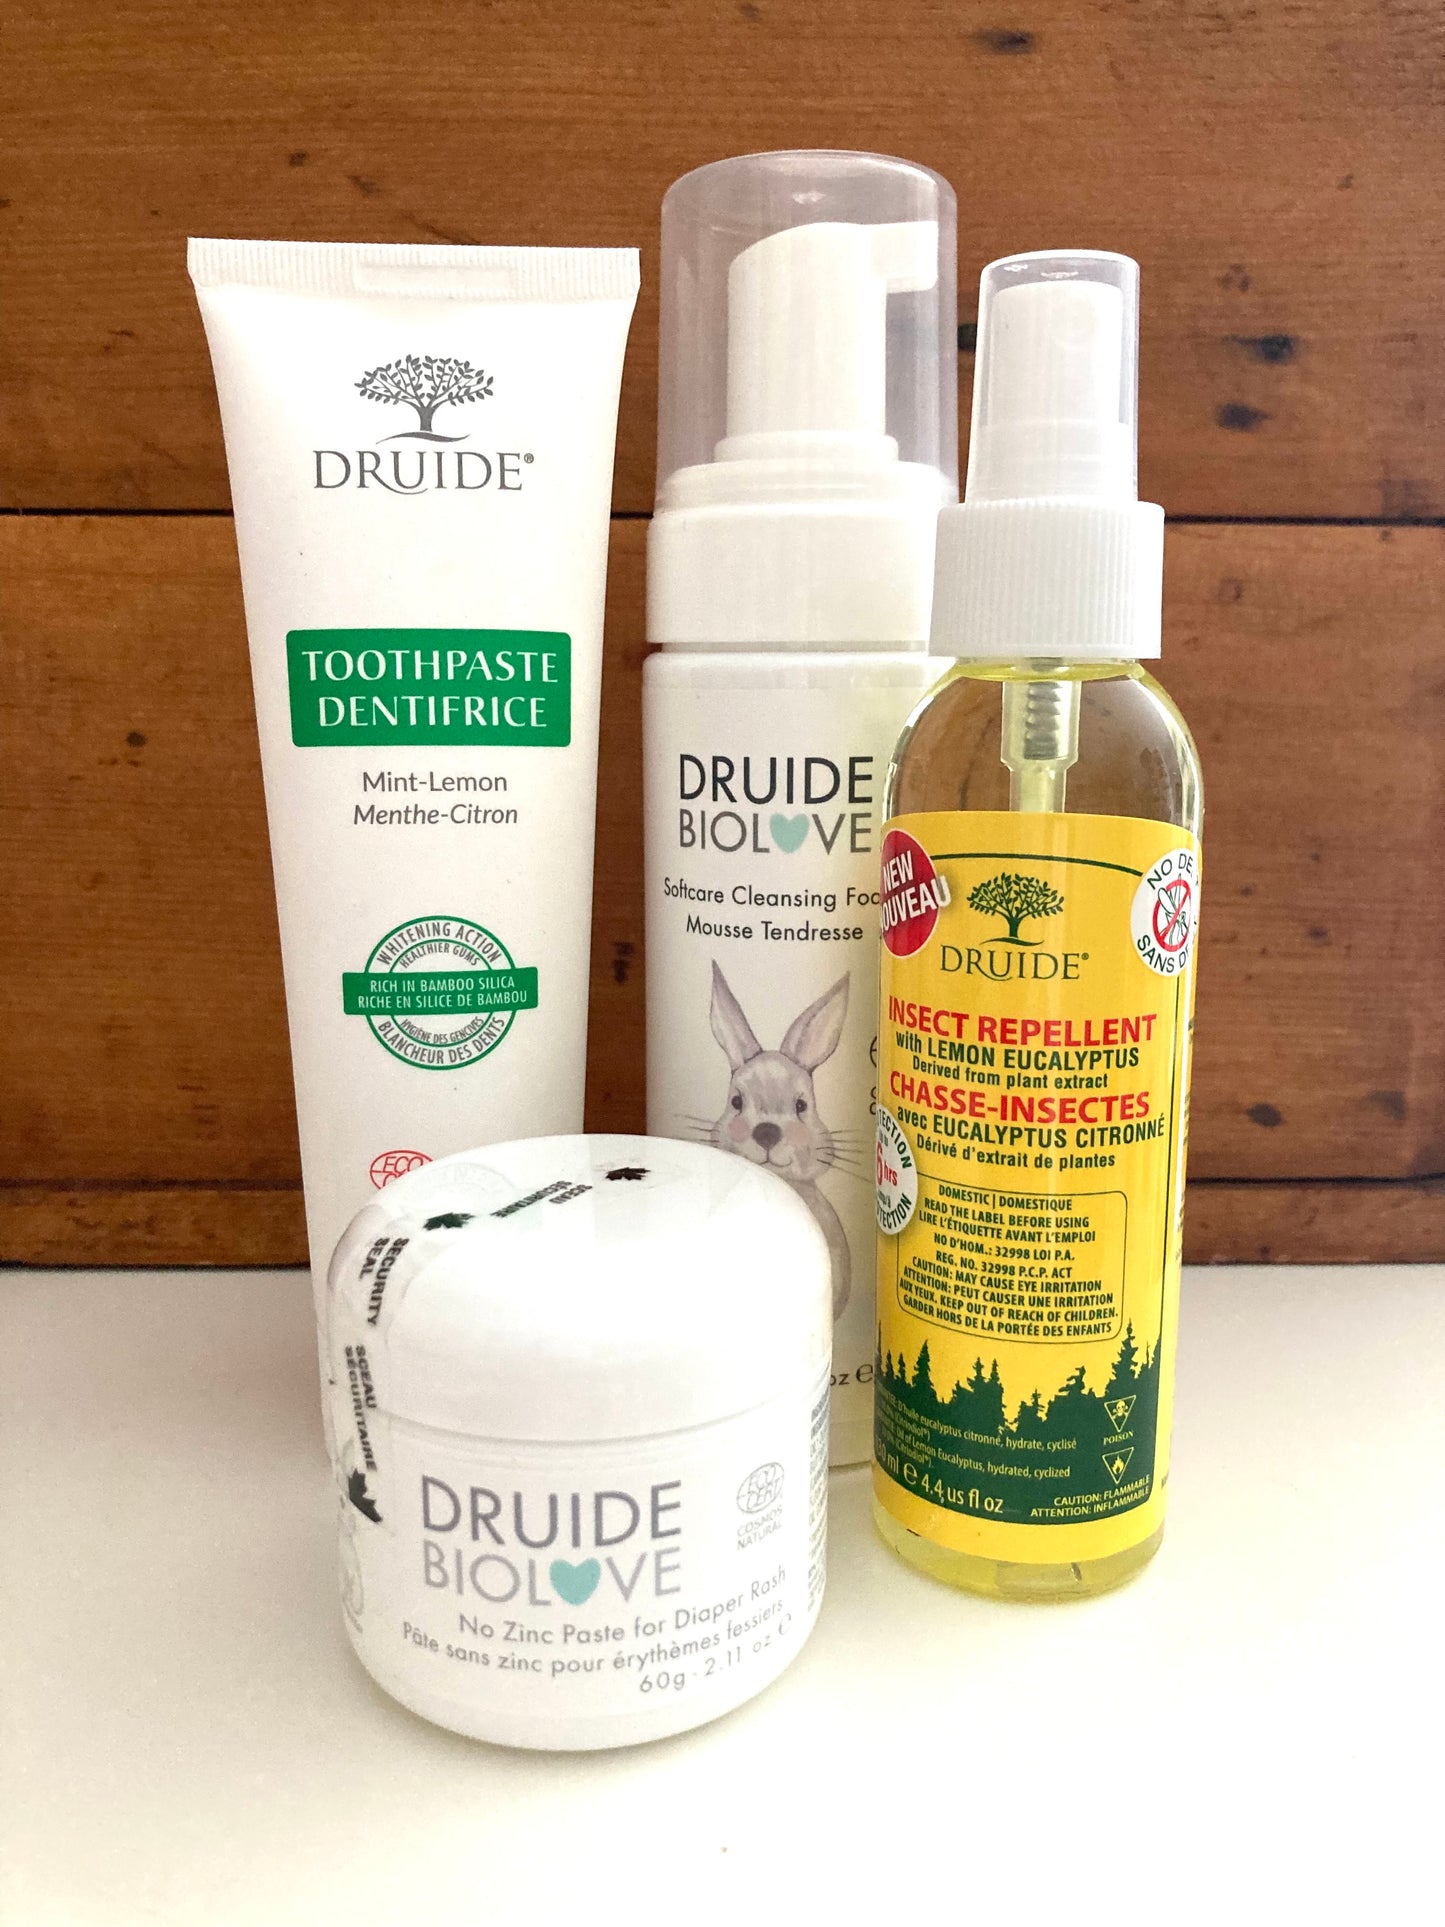 Holistic by Druide - TOOTHPASTE, Anise/Mint-Lemon